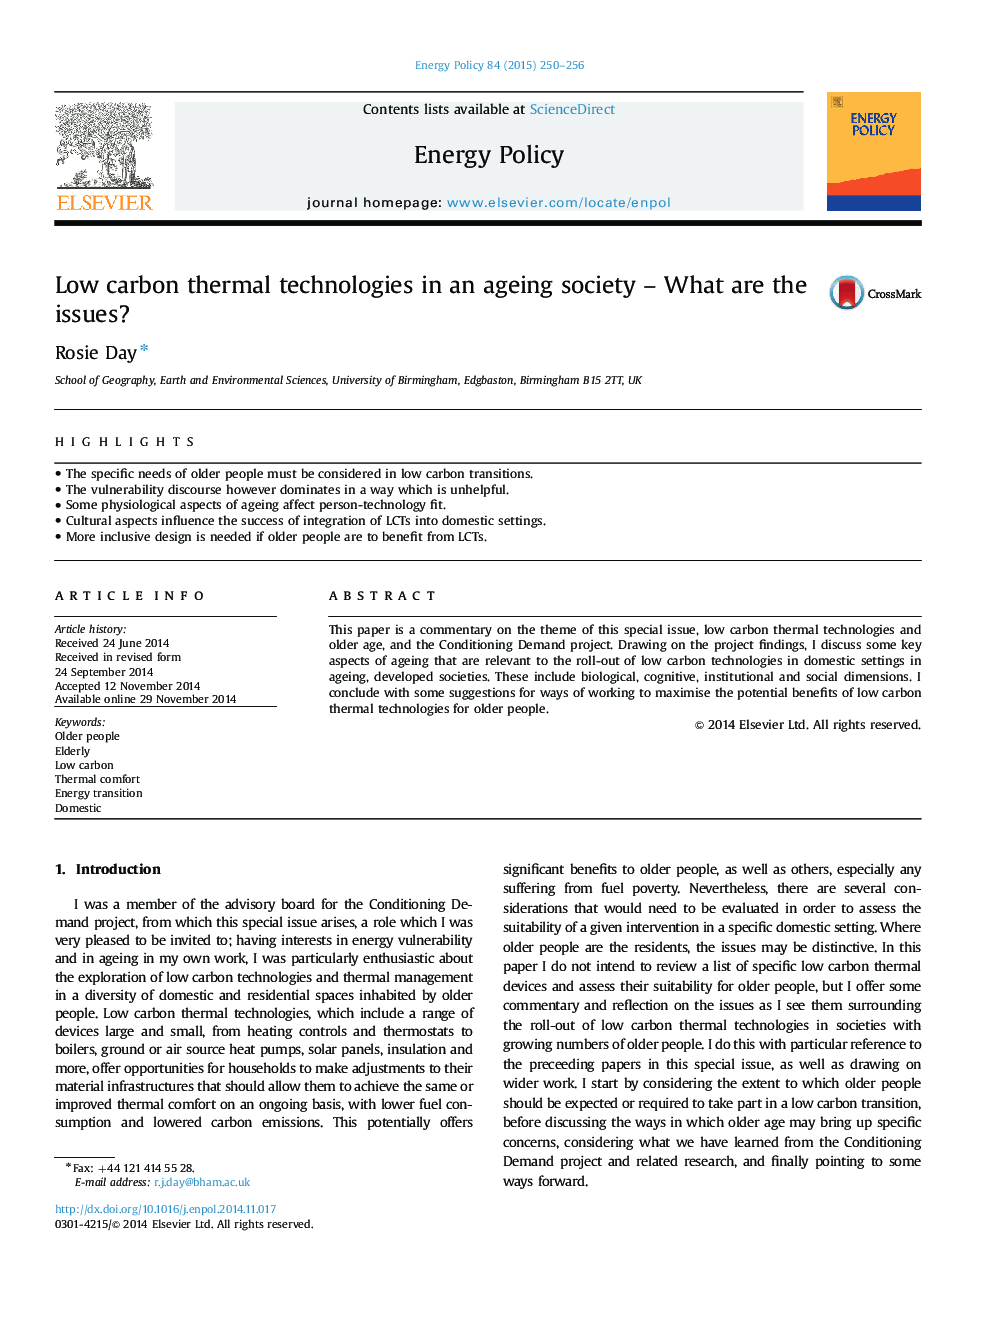 Low carbon thermal technologies in an ageing society - What are the issues?